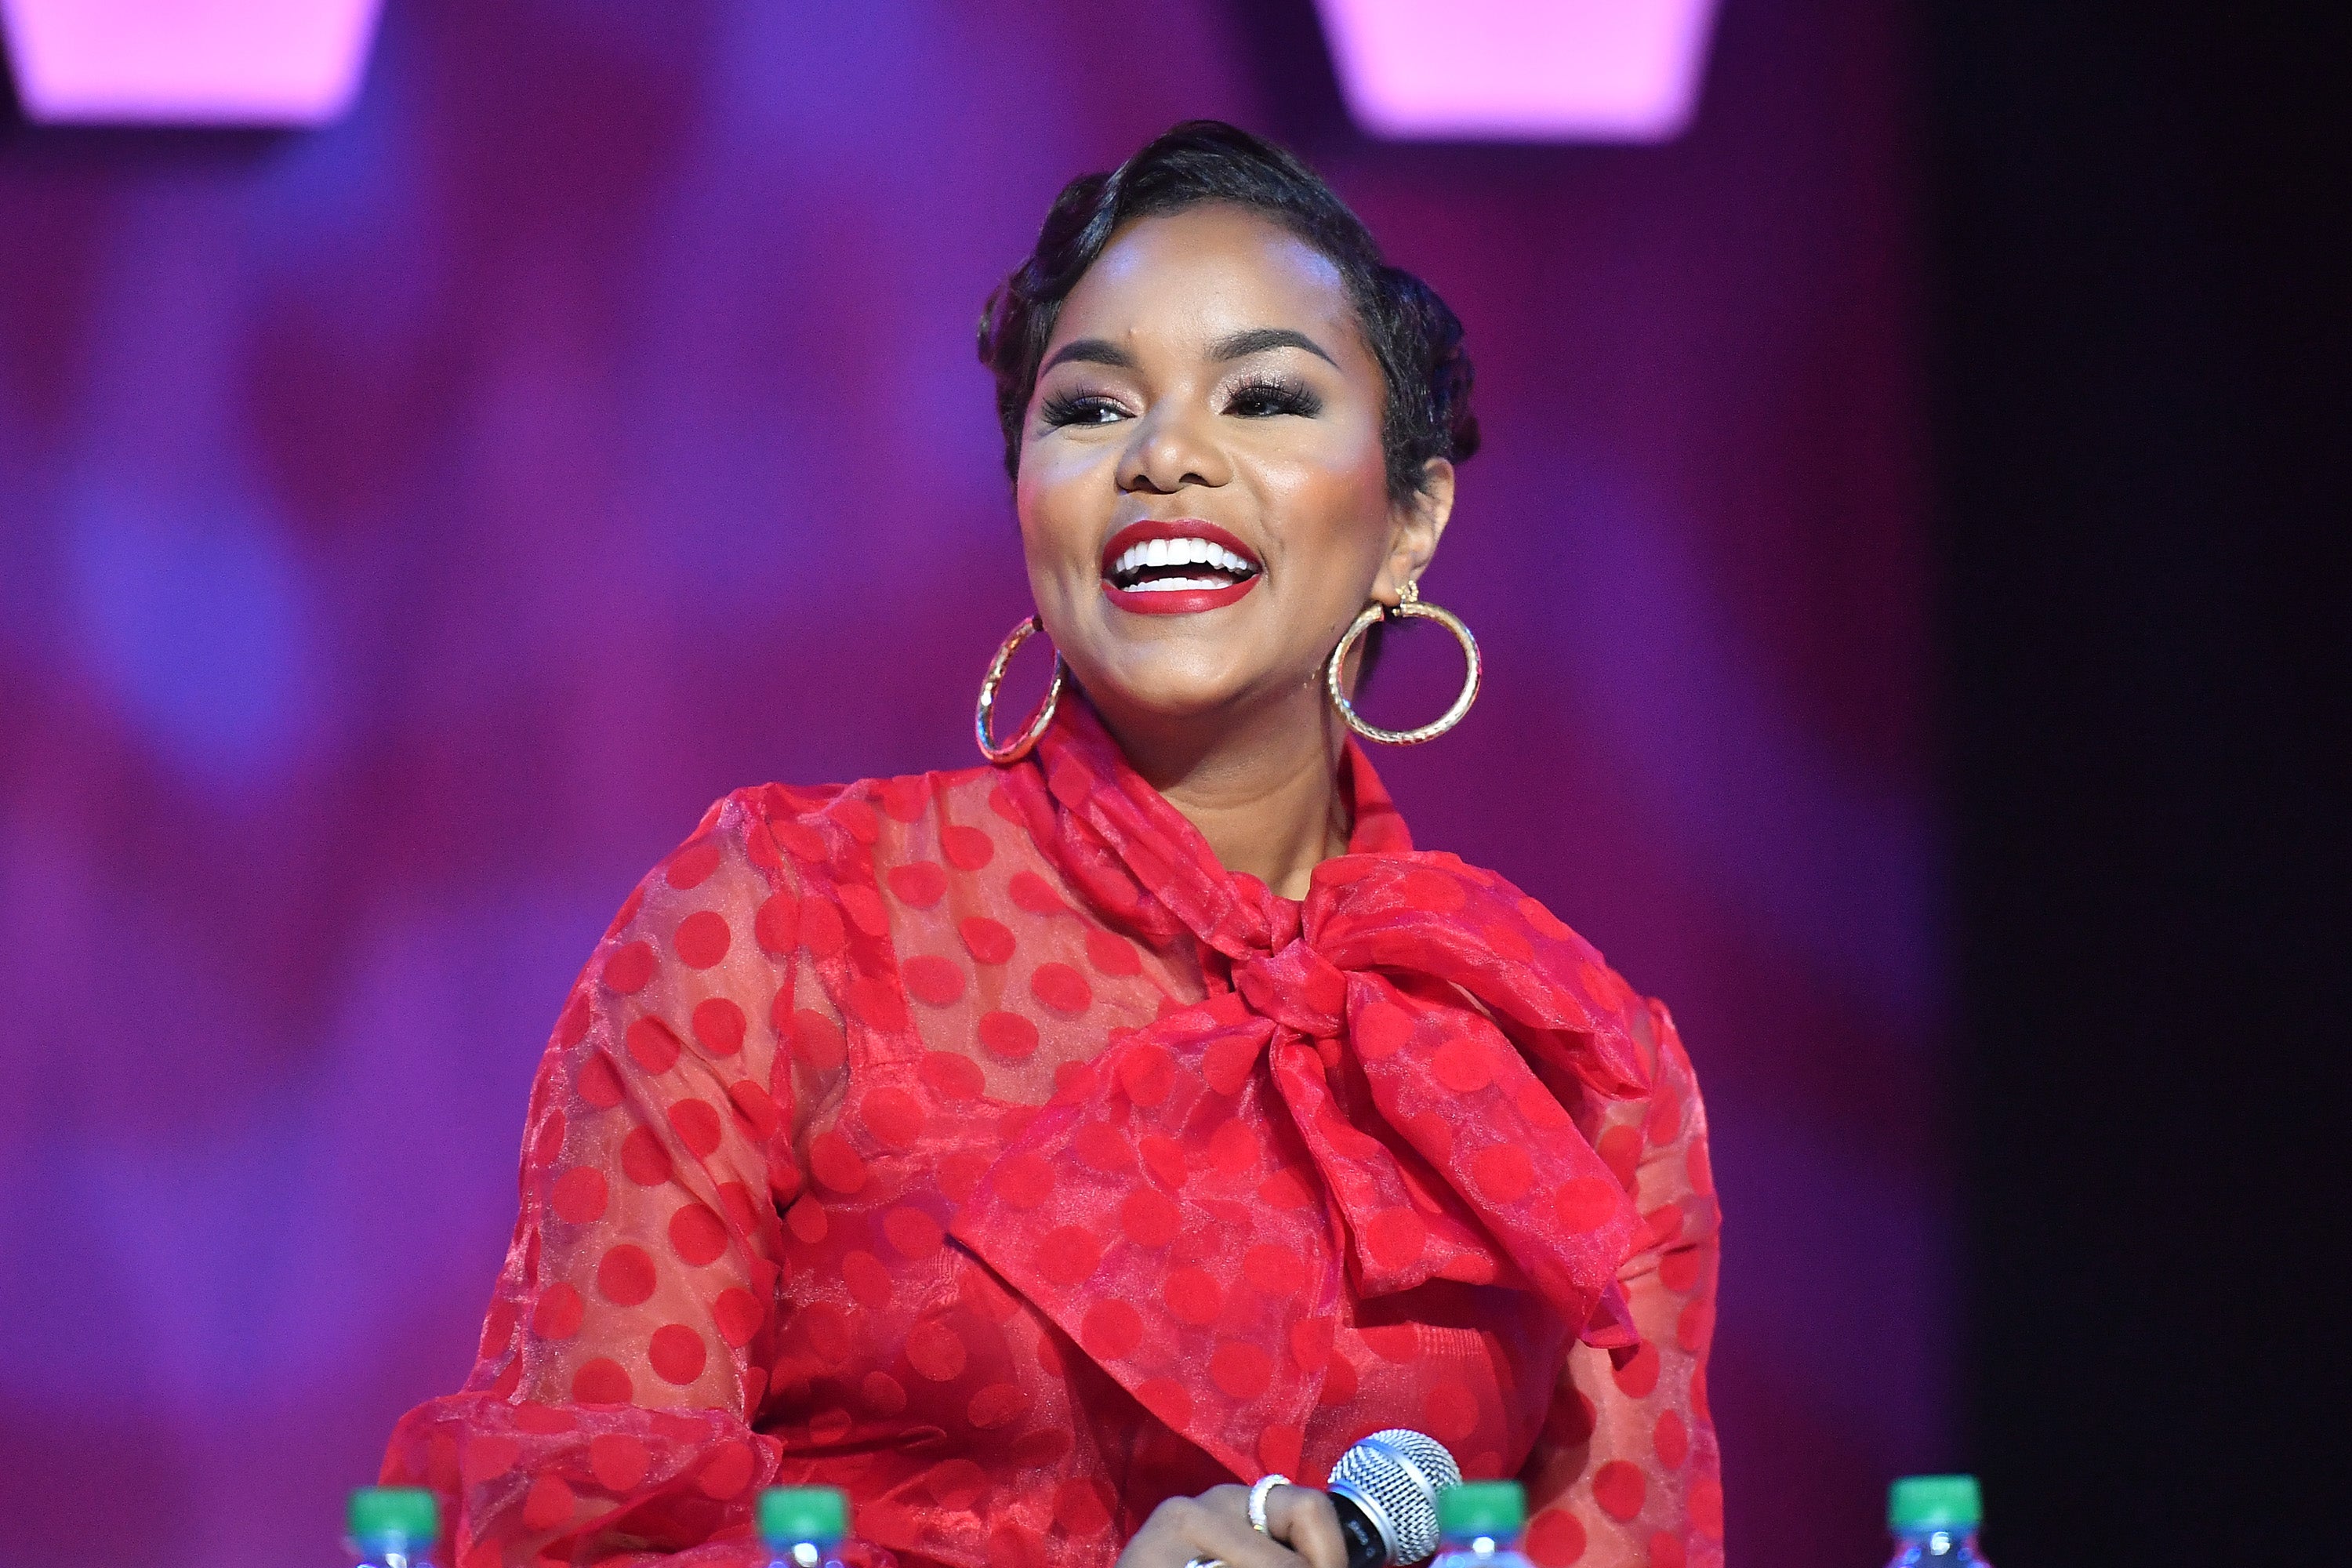 Overjoyed! LeToya Luckett Is Pregnant With Her Second Child